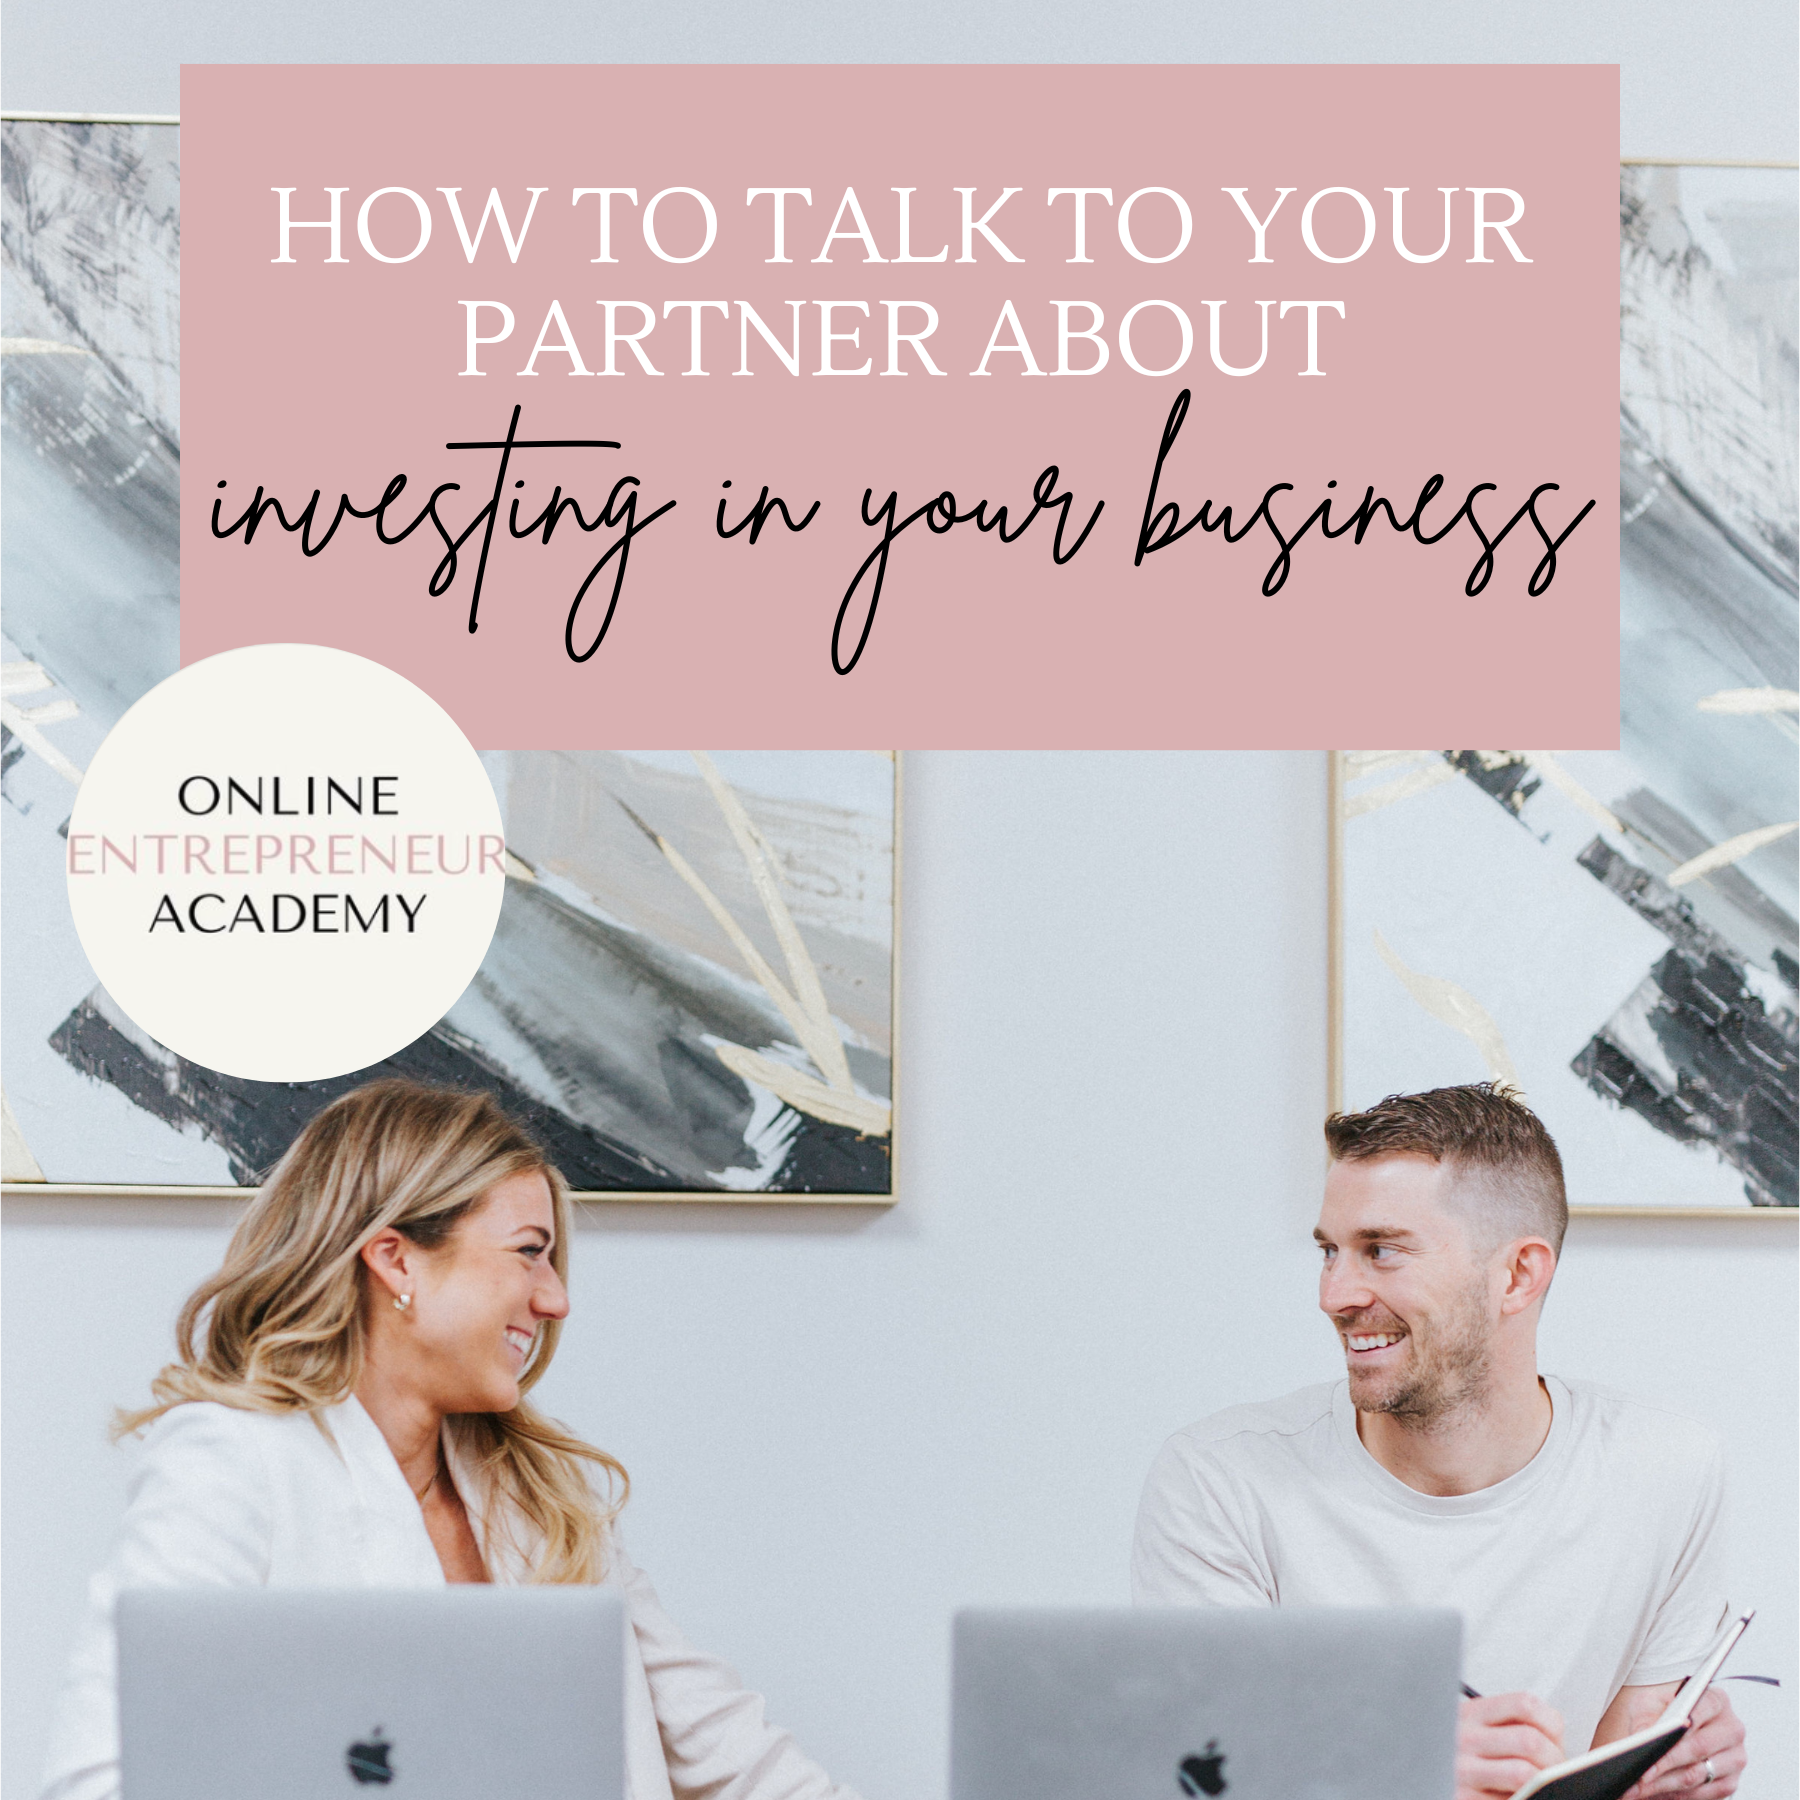 How To Talk To Your Partner About Investing In Your Business